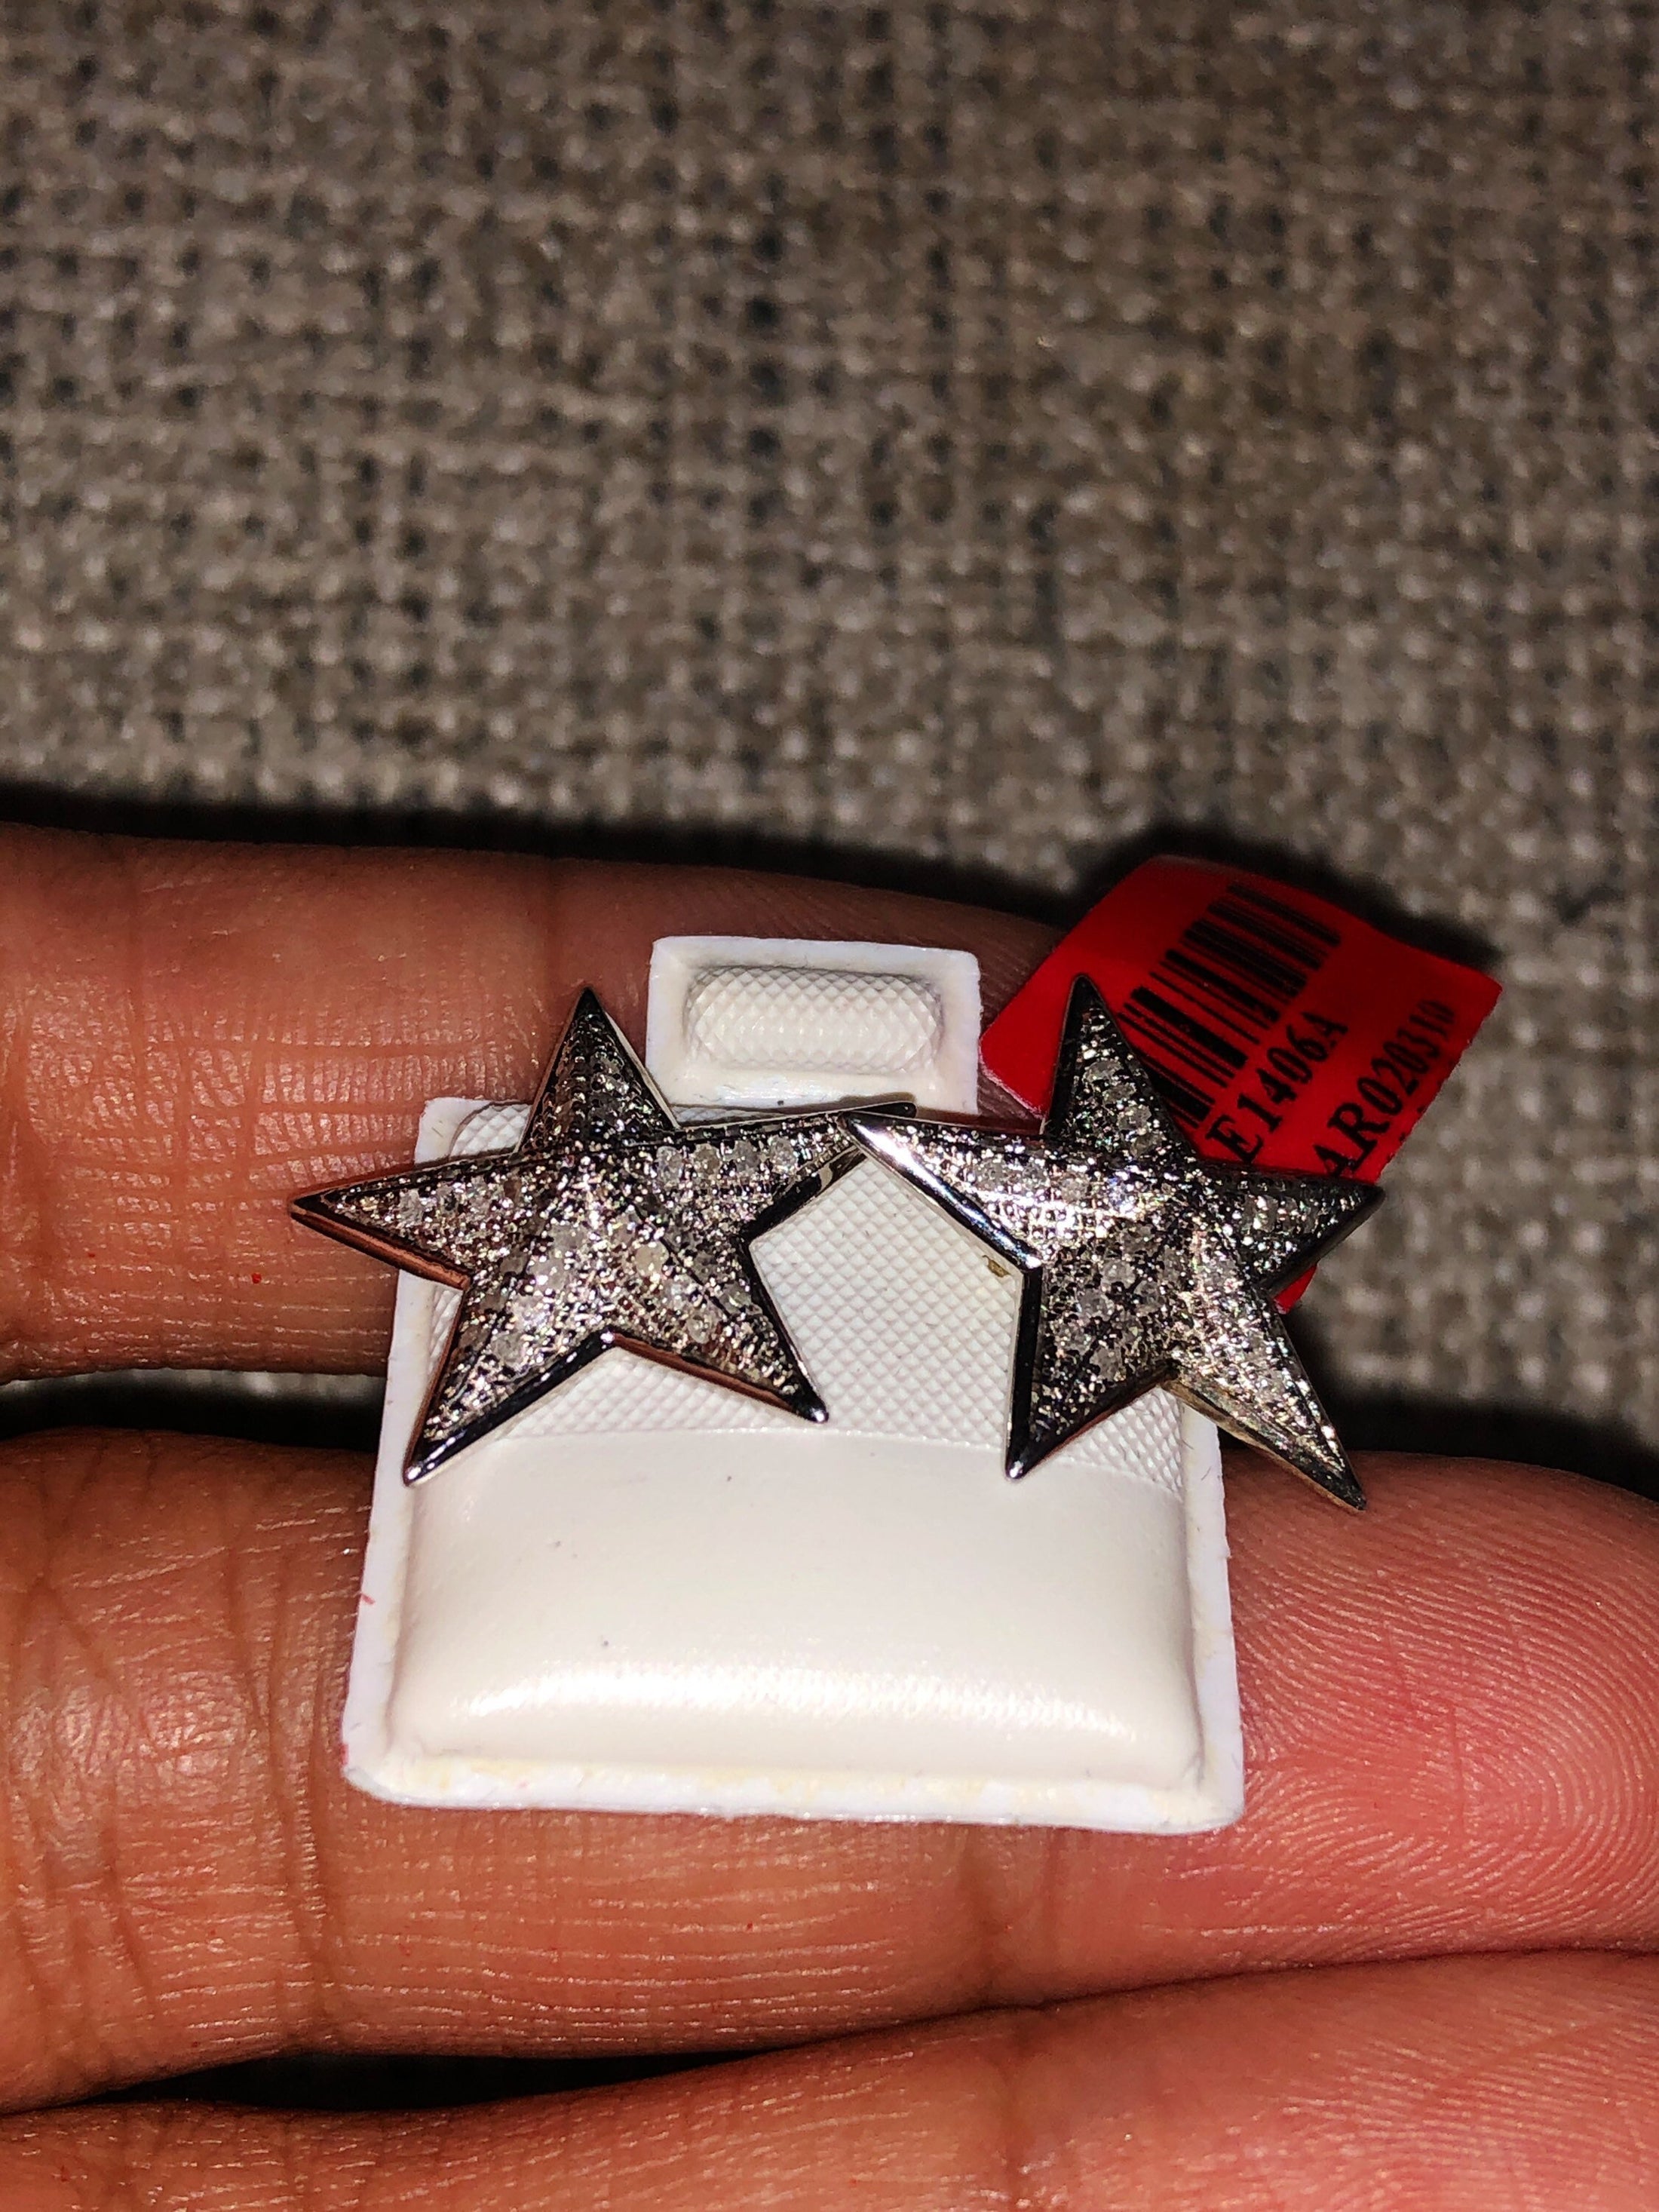 Real diamond star earrings. Beautiful gift. Not CZ! 100% natural diamonds. Comes w/ certificate of authenticity. Huge sale! .55 cttw